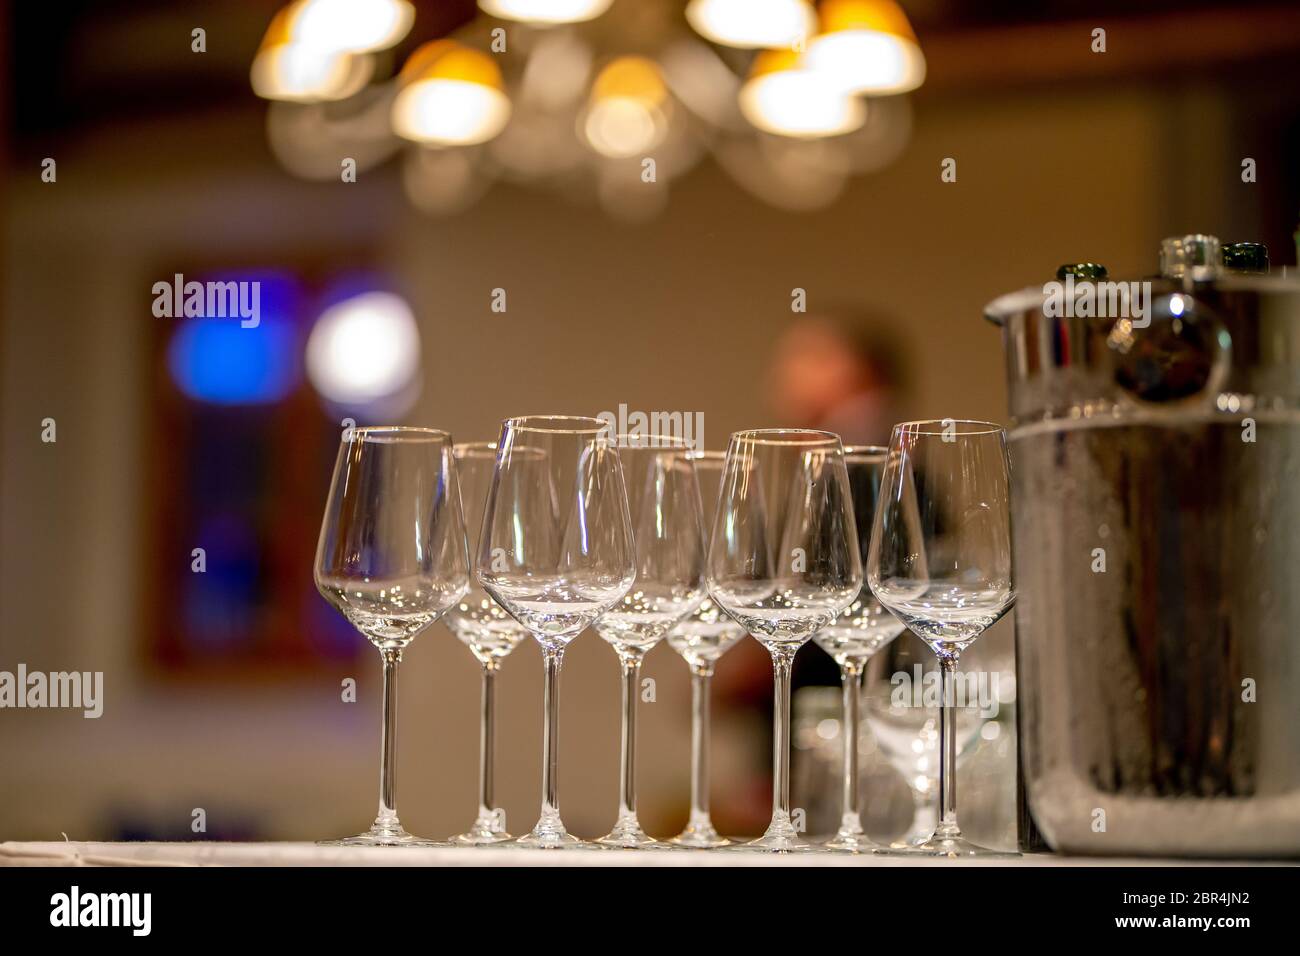 Empty glasses, wine bottles and bucket with ice on table in restaurant. Ice bucket, wine glasses and bottles arranged on the table for wedding recepti Stock Photo